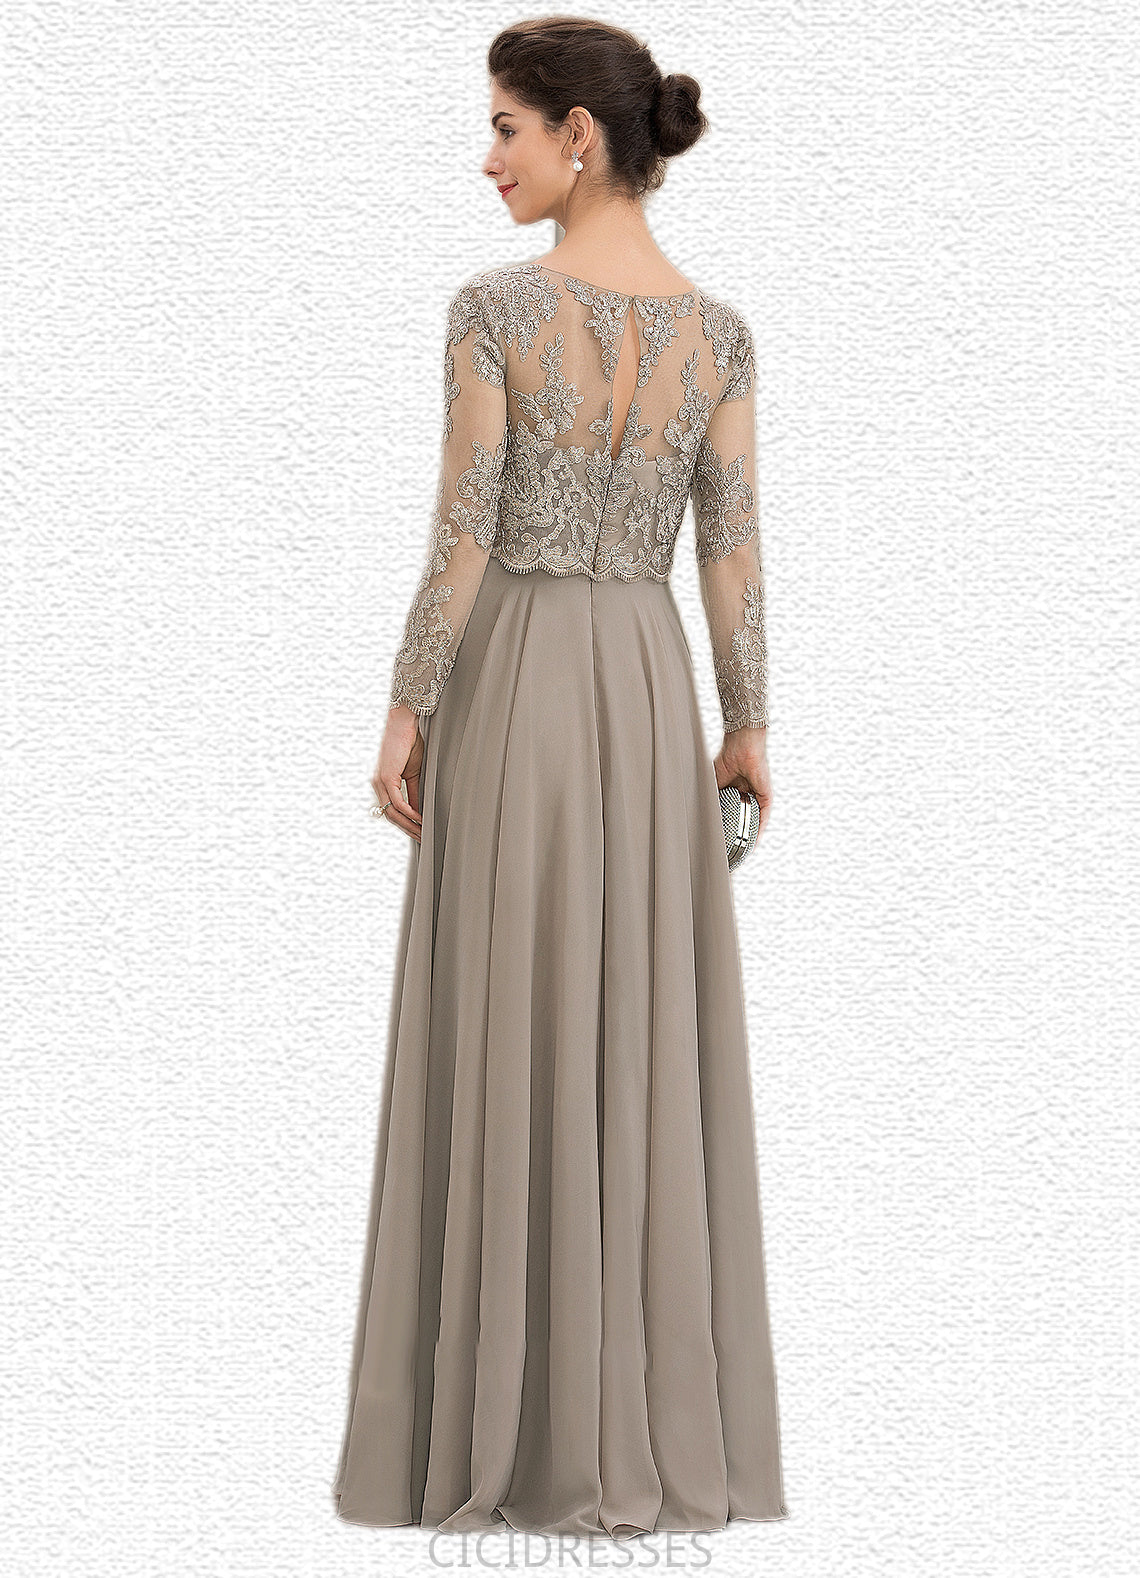 Summer A-Line Scoop Neck Floor-Length Chiffon Lace Mother of the Bride Dress With Sequins CIC8126P0014612